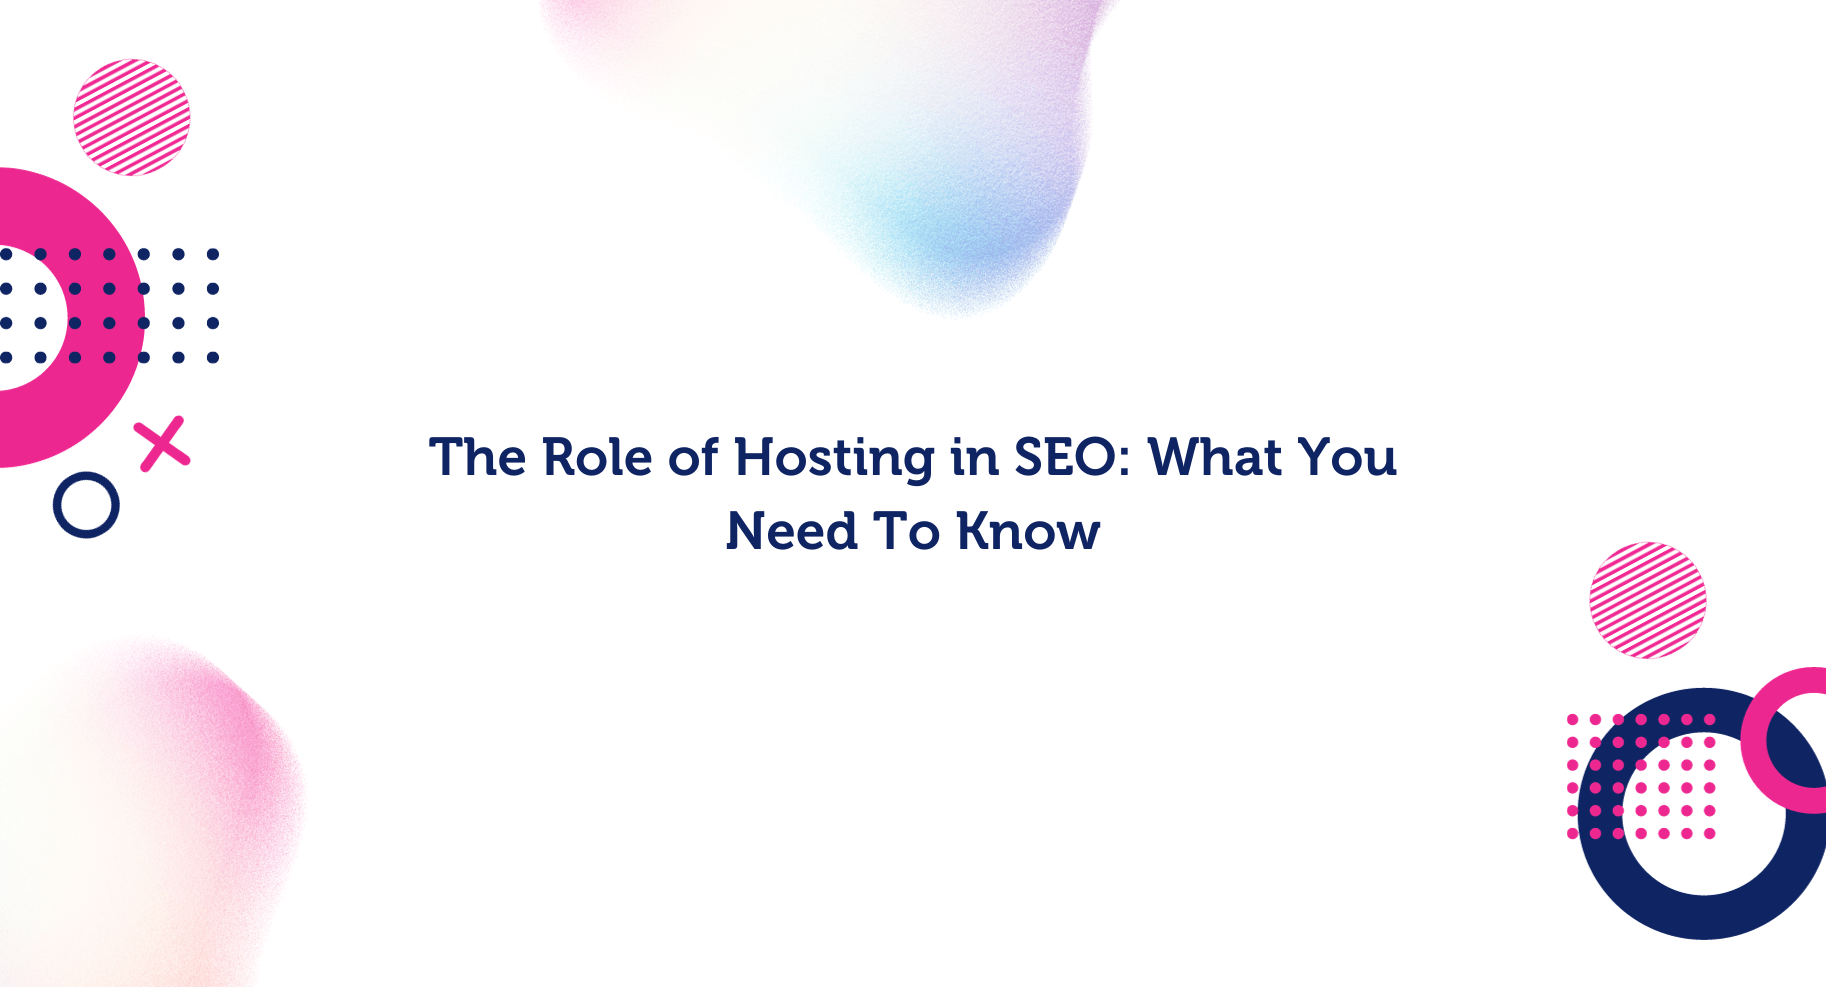 The Role of Hosting in SEO What You Need To Know